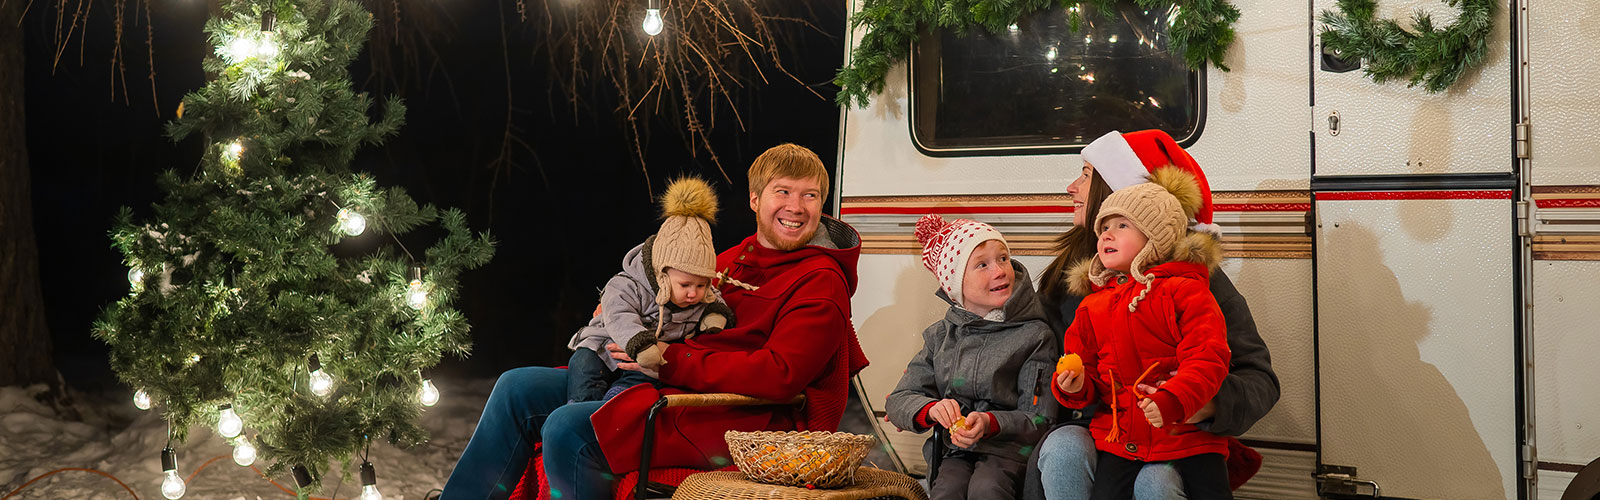 Tips for Celebrating the Holidays in Your RV